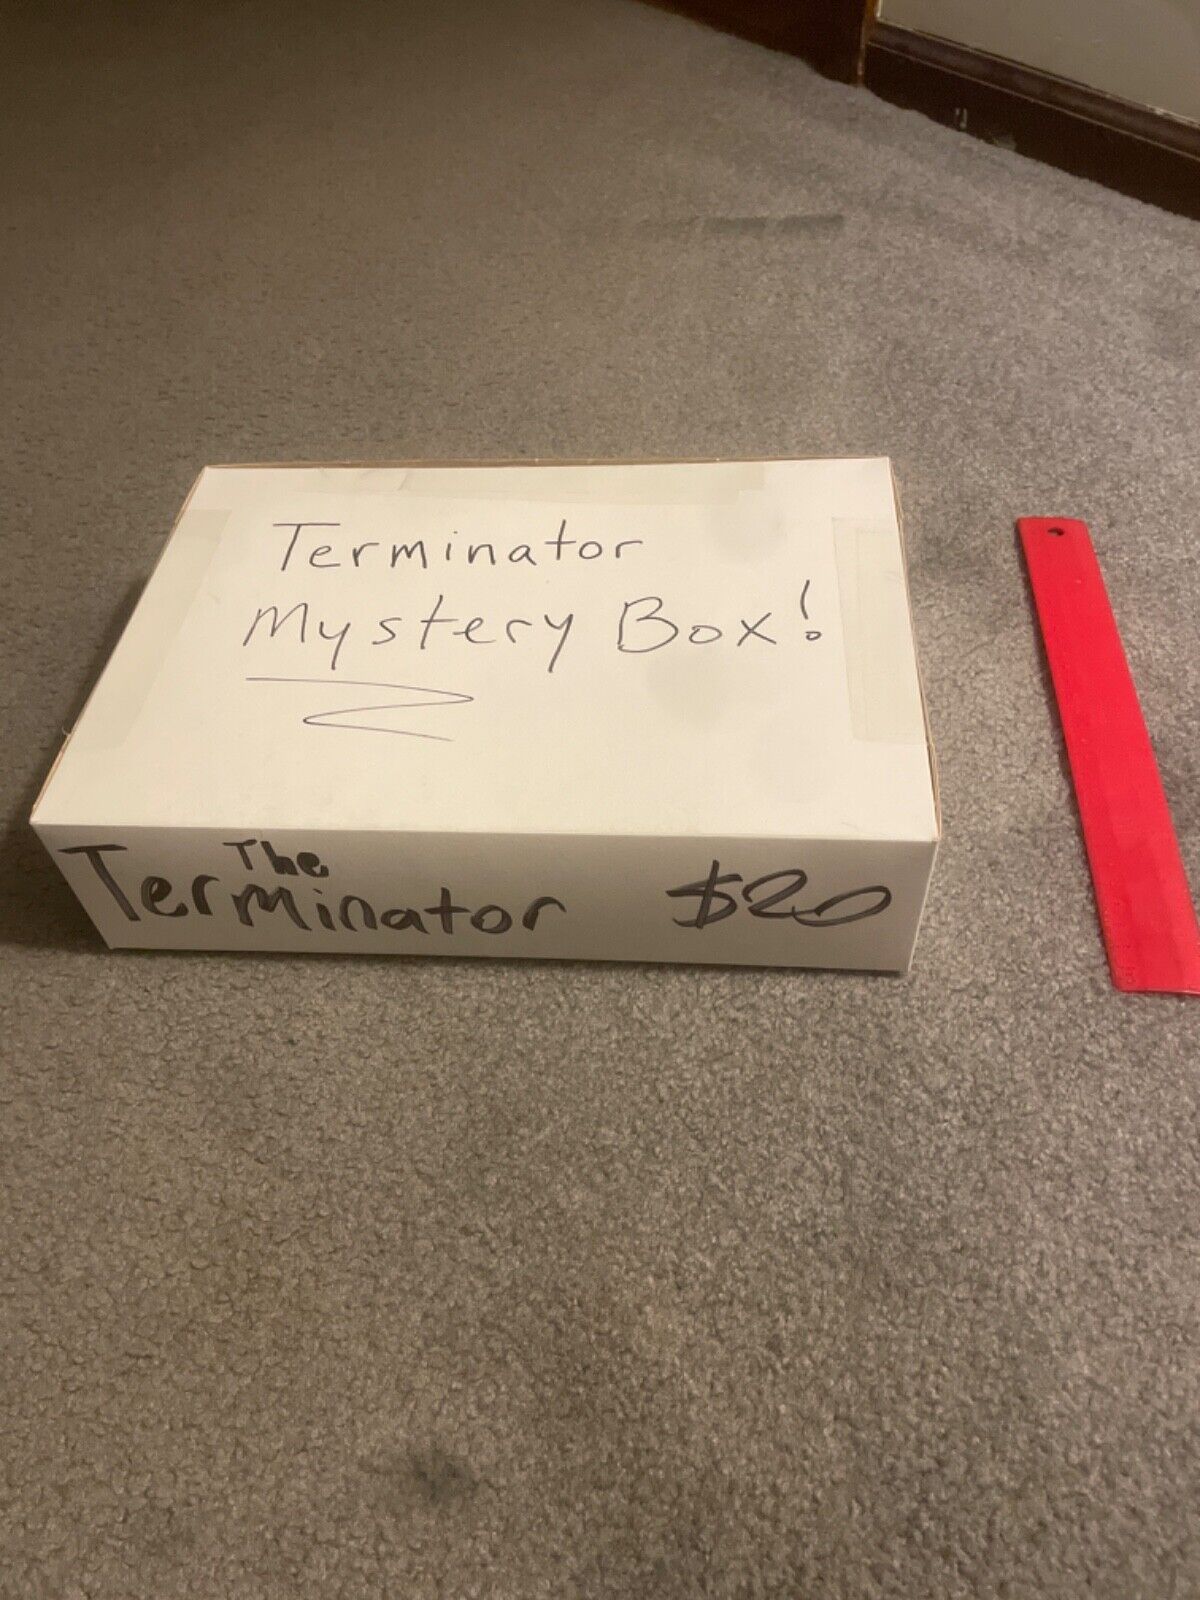  TERMINATOR LOT hand picked from personal collection $50 retail value  